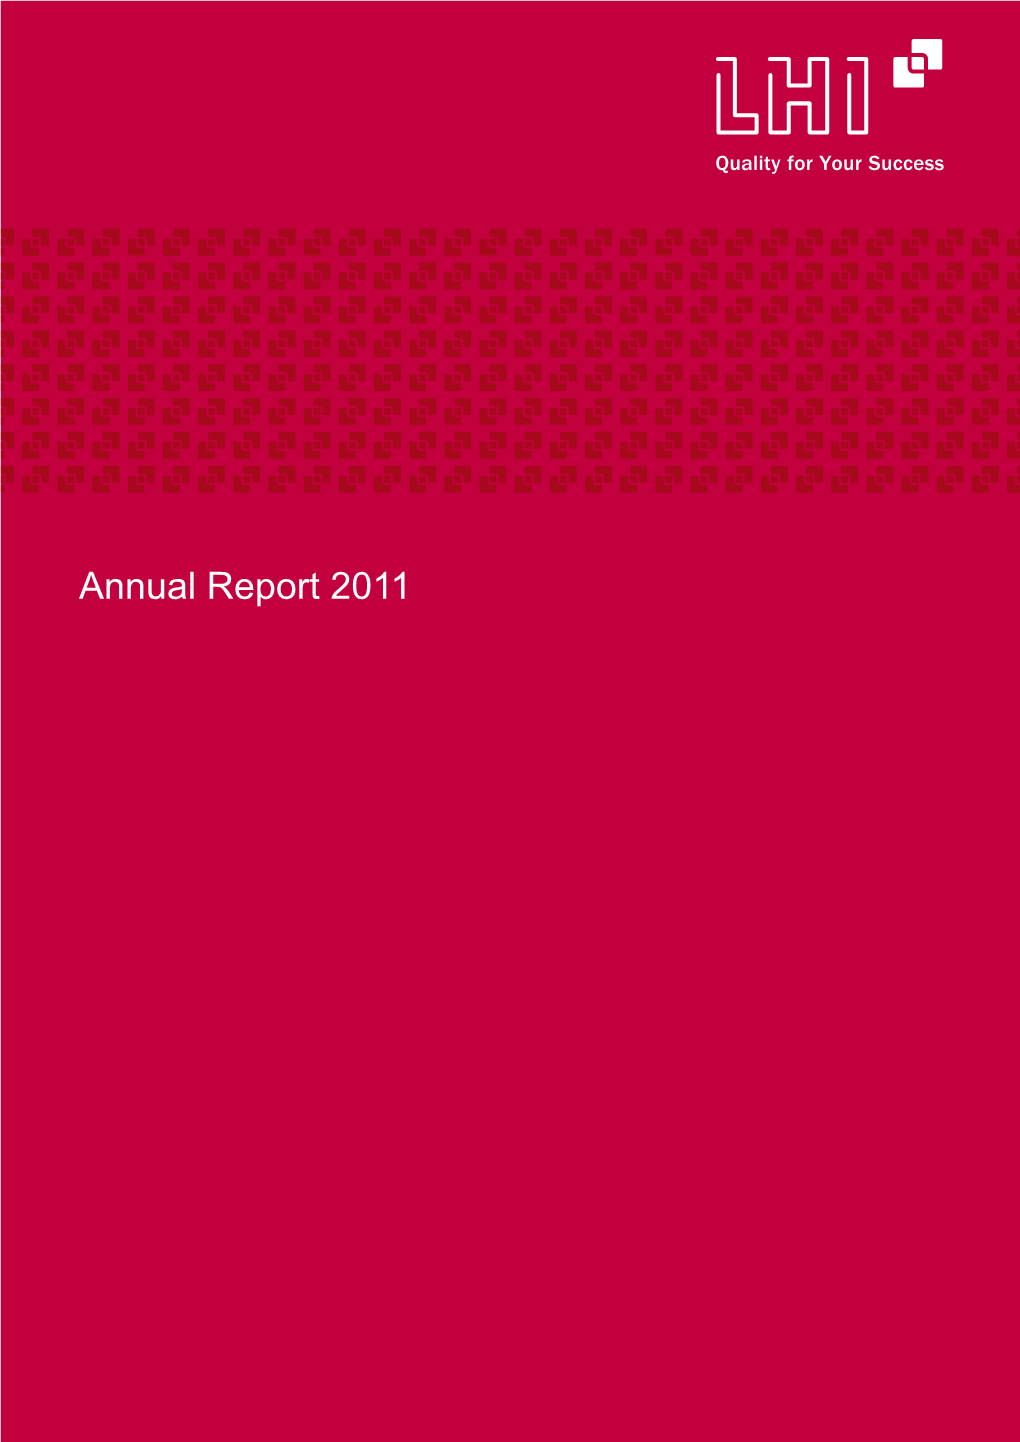 Annual Report 2011 the Work of Art Depicted in This Business Report, Entitled “Aufschwung” (Upswing), Is by the Circle of Artists Known As “Inges Idee” from Berlin